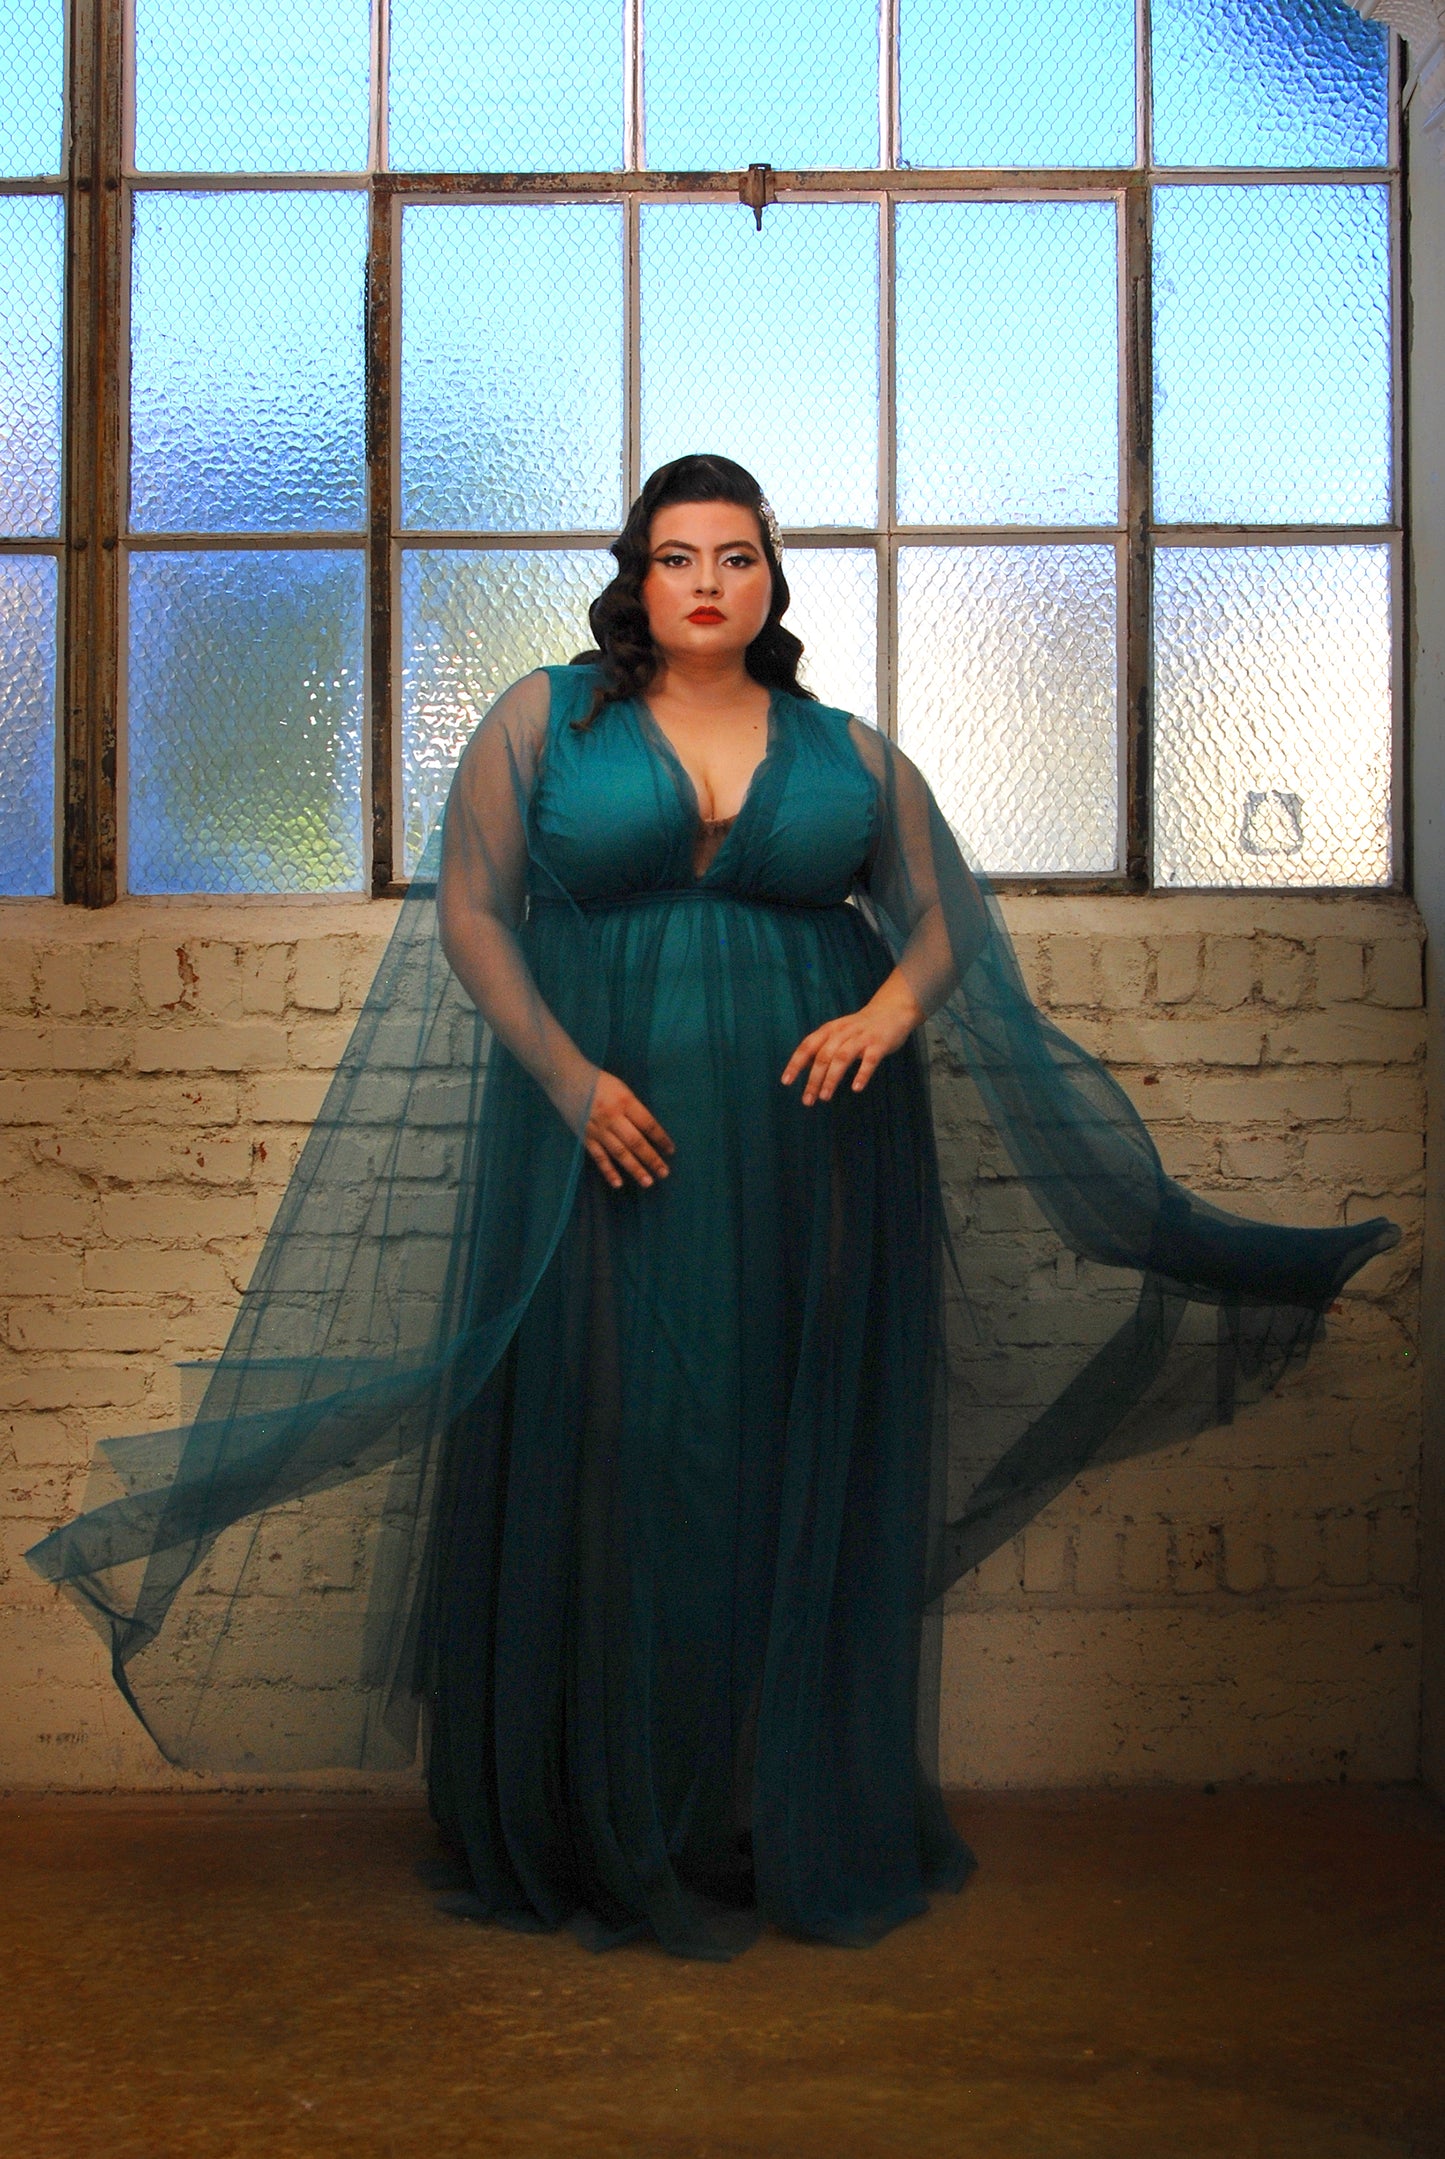 Gothic Glamour - Bombshell Plunge Maxi Gown in Peacock Green with Sheer Mesh Sleeves